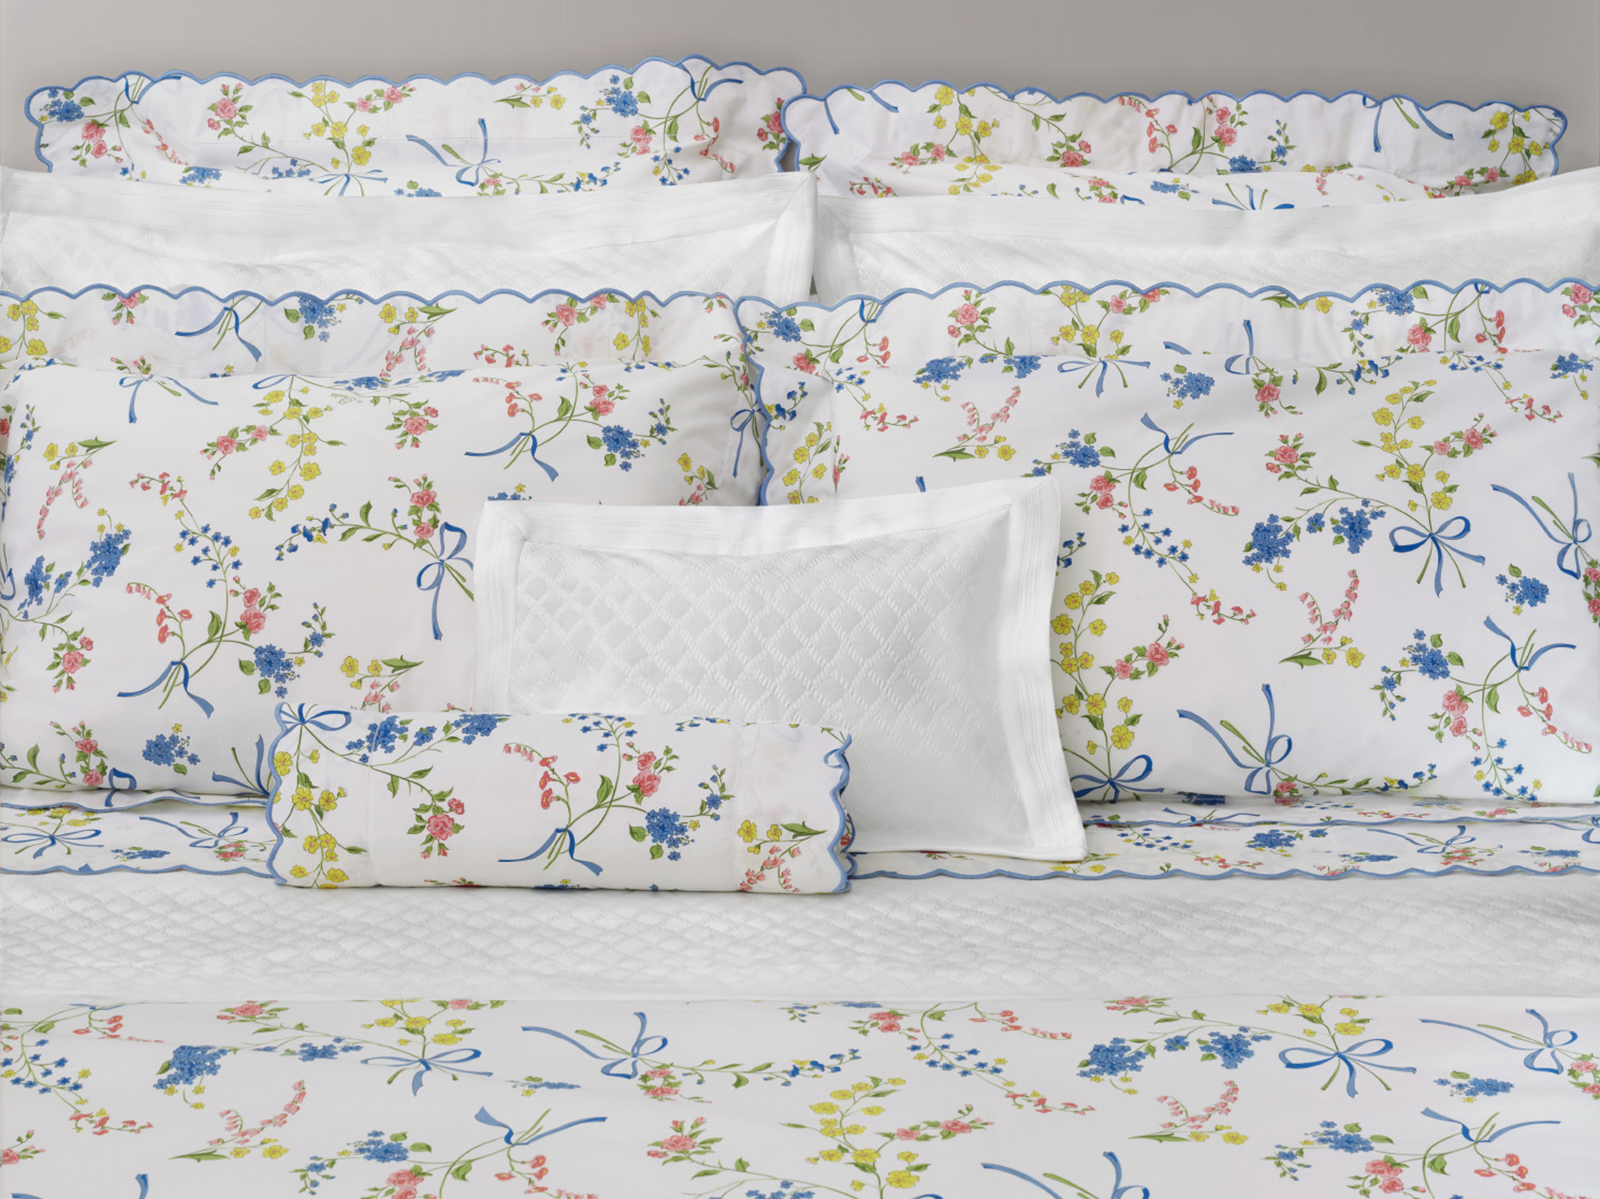 Close up of pillows on a bed made with floral patterned linens on a white background